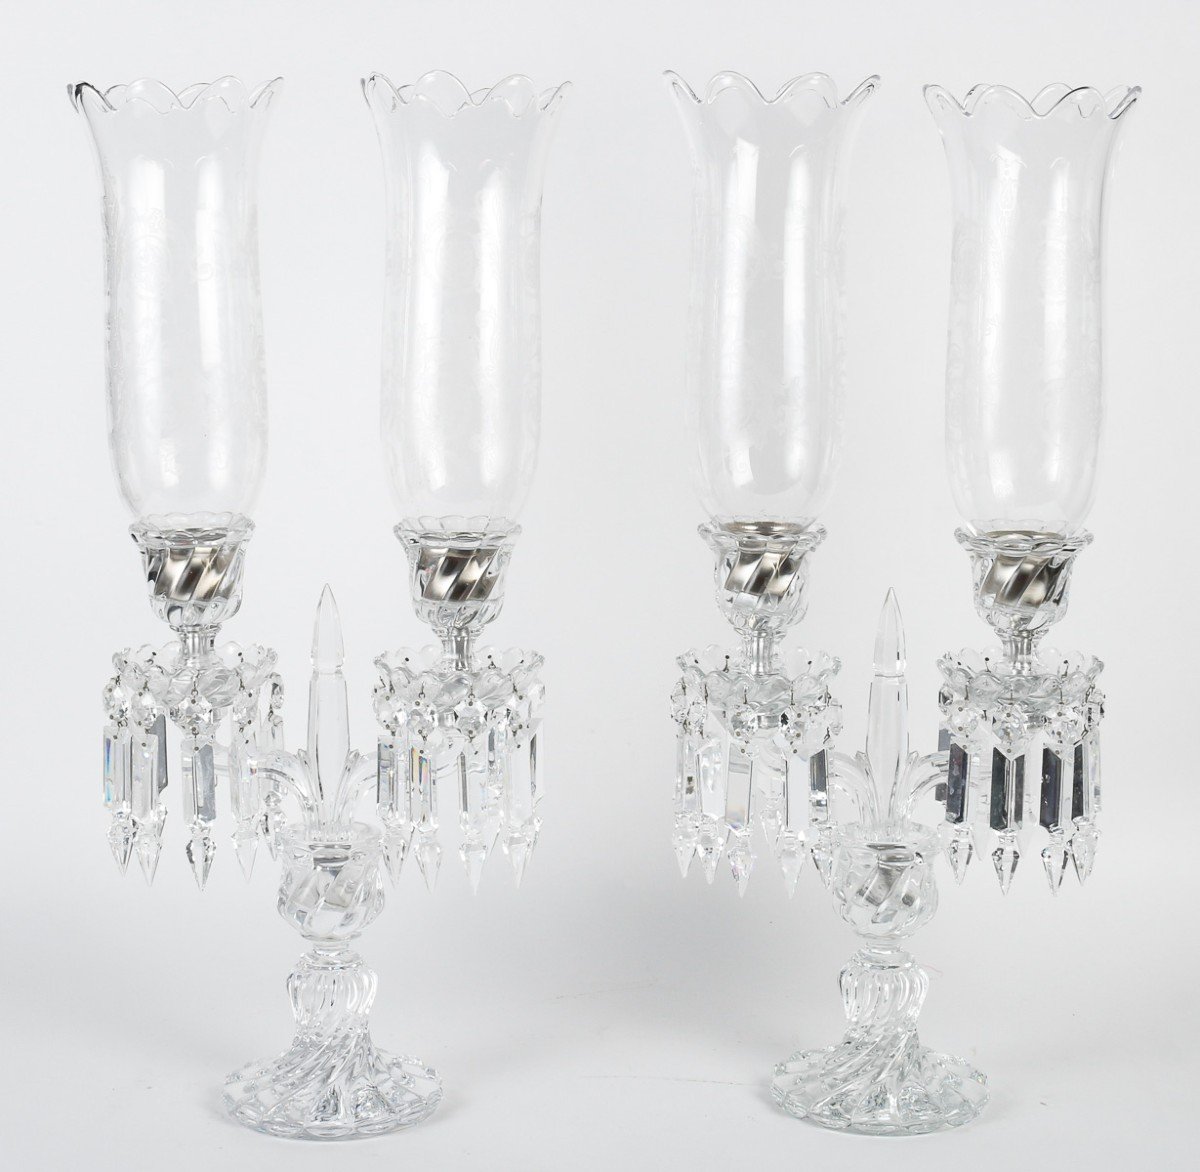 Pair Of Baccarat Hallmarked Crystal Candlesticks, With Their Tealight Holders